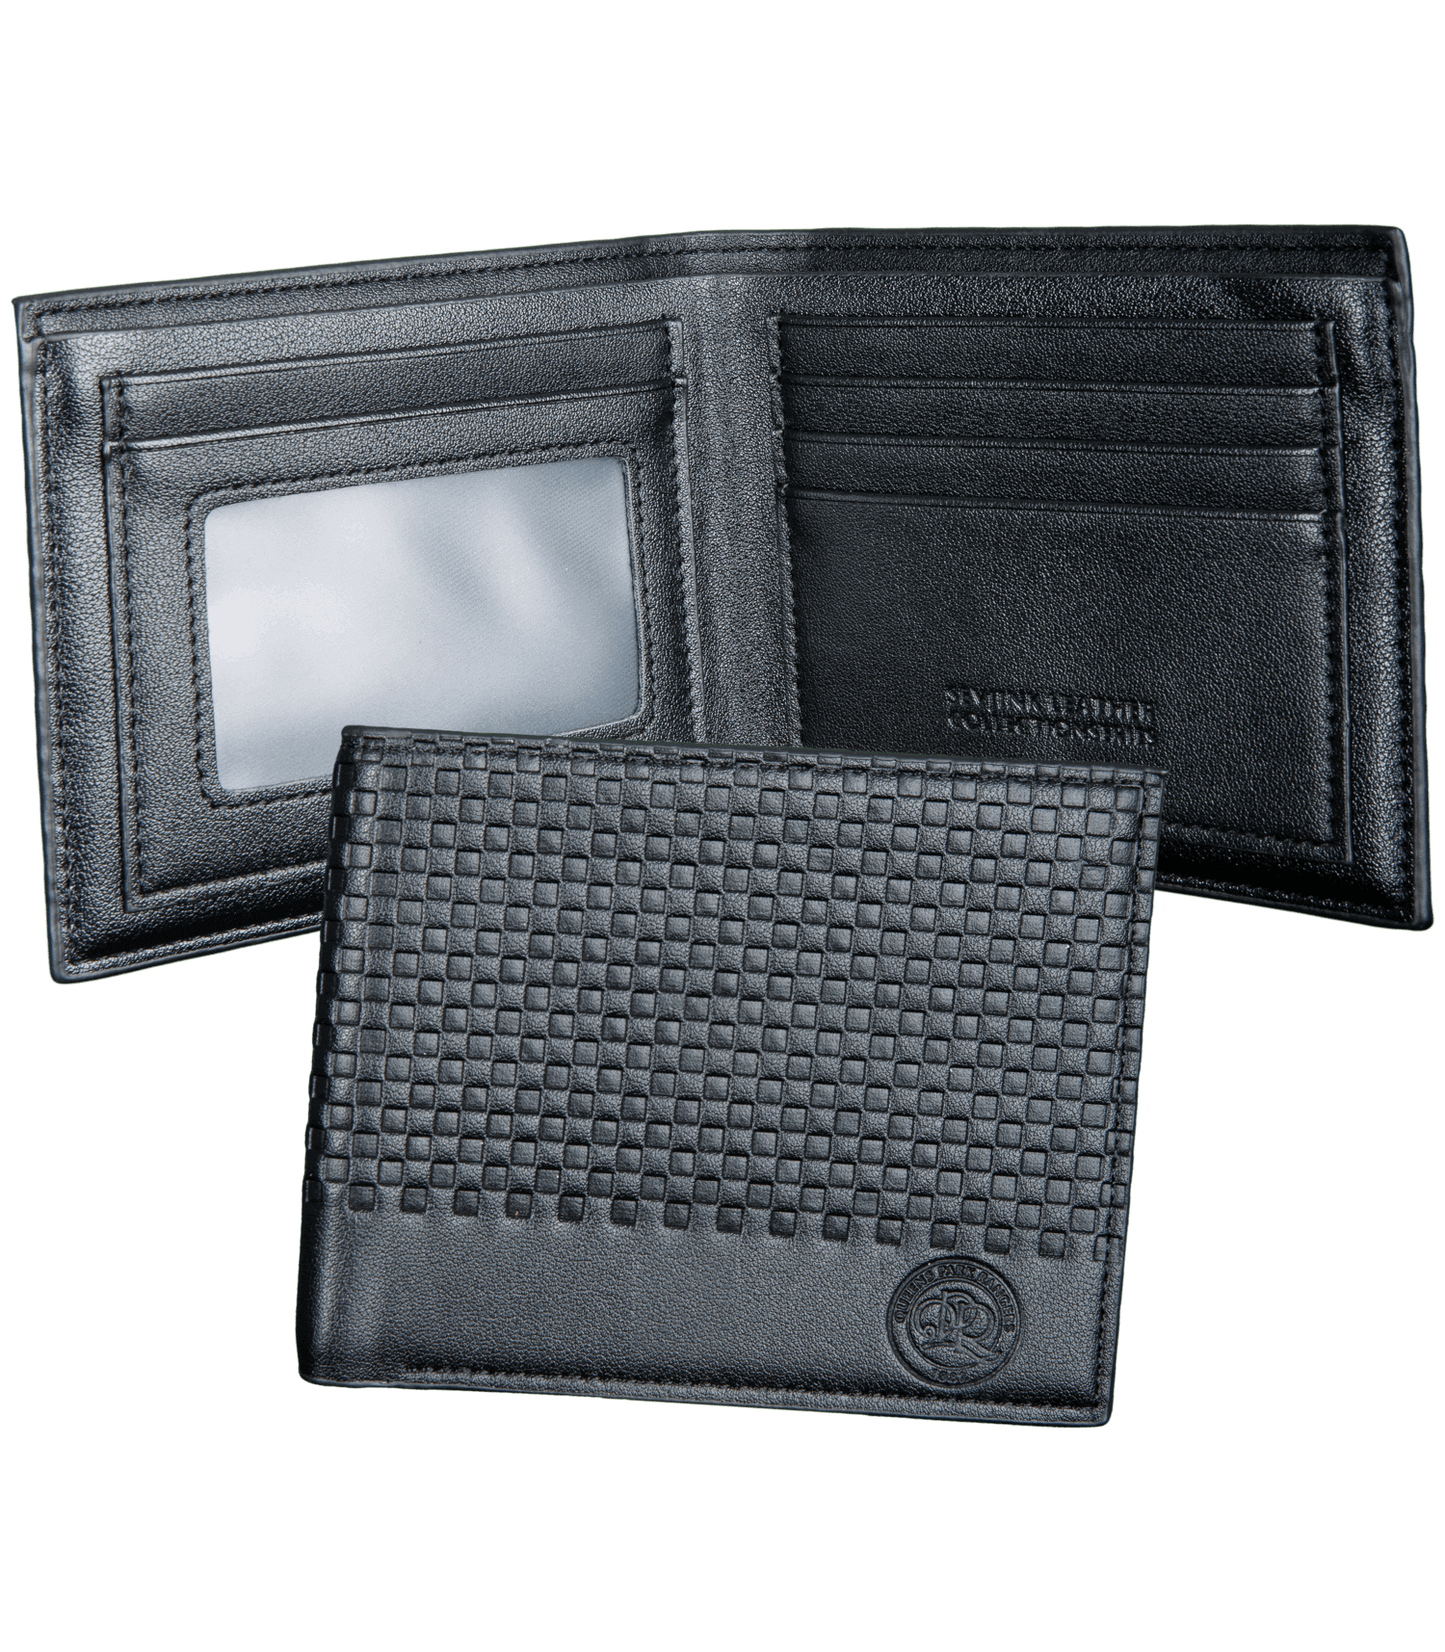 WALLET AND PEN SET